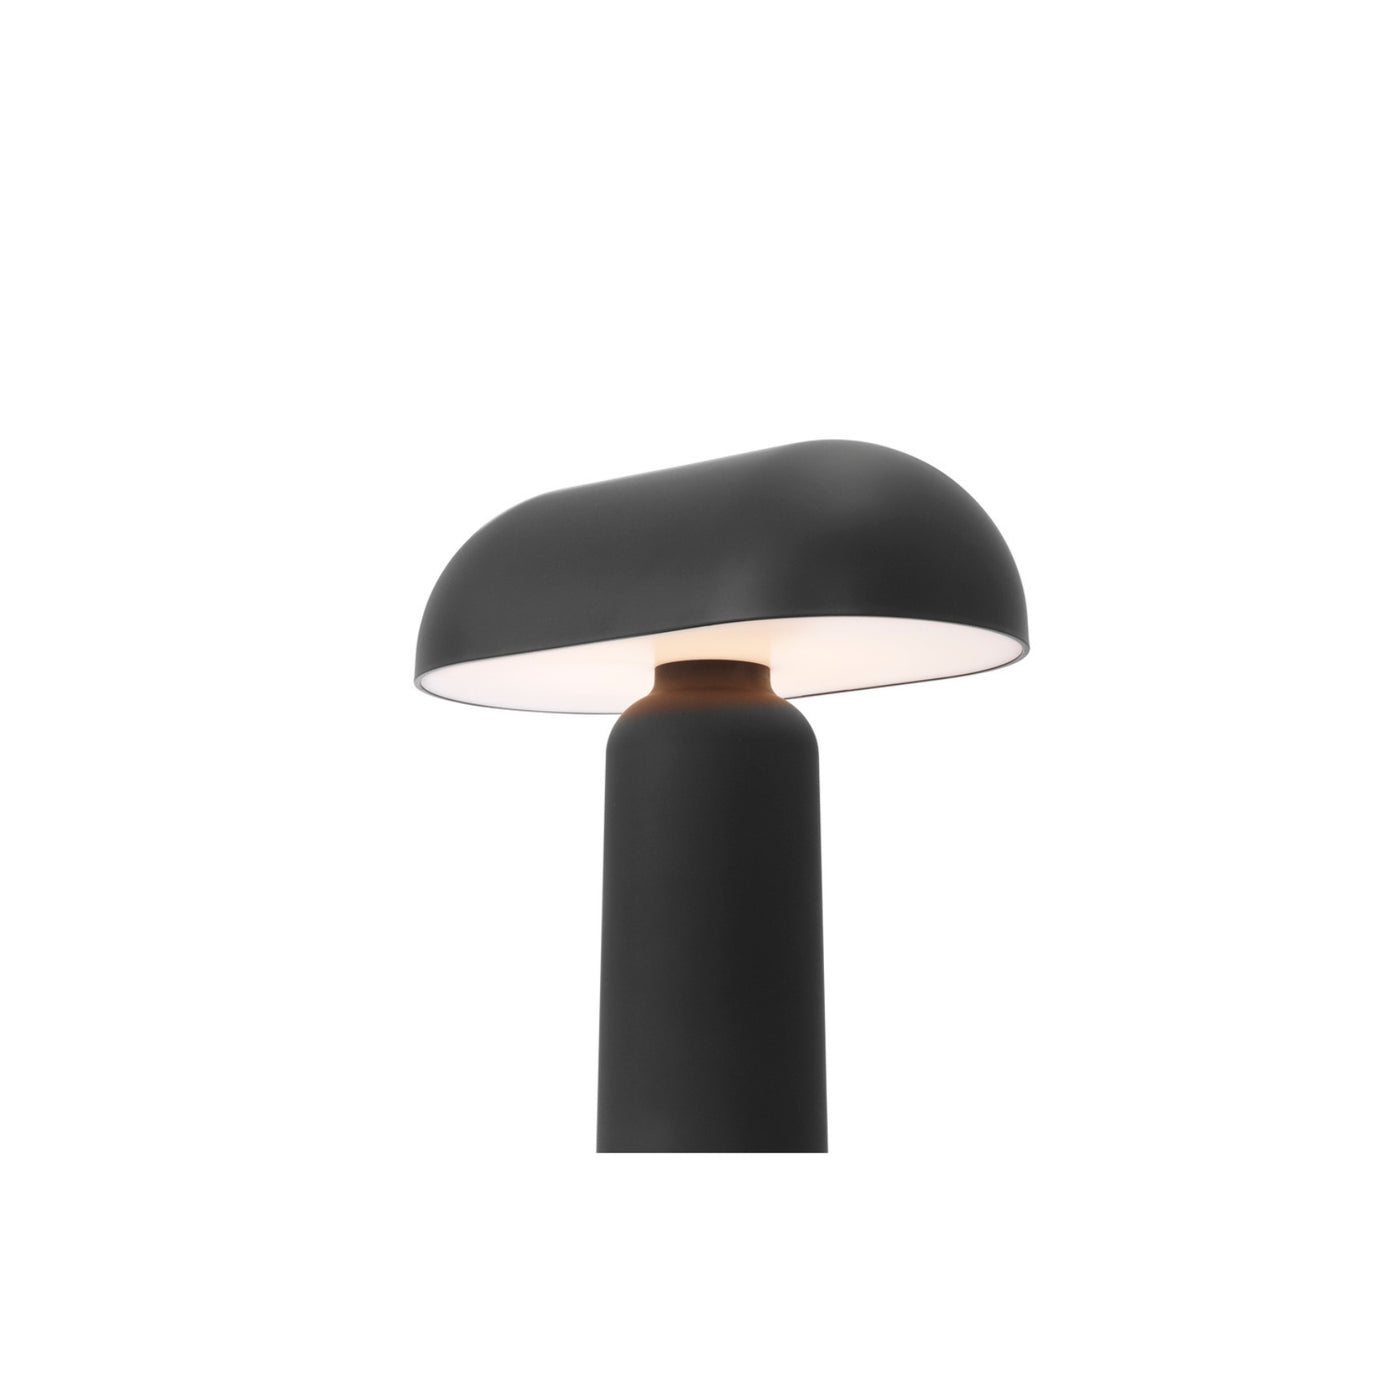 Normann Copenhagen Porta Table Lamp. Free UK delivery from someday designs. #colour_black